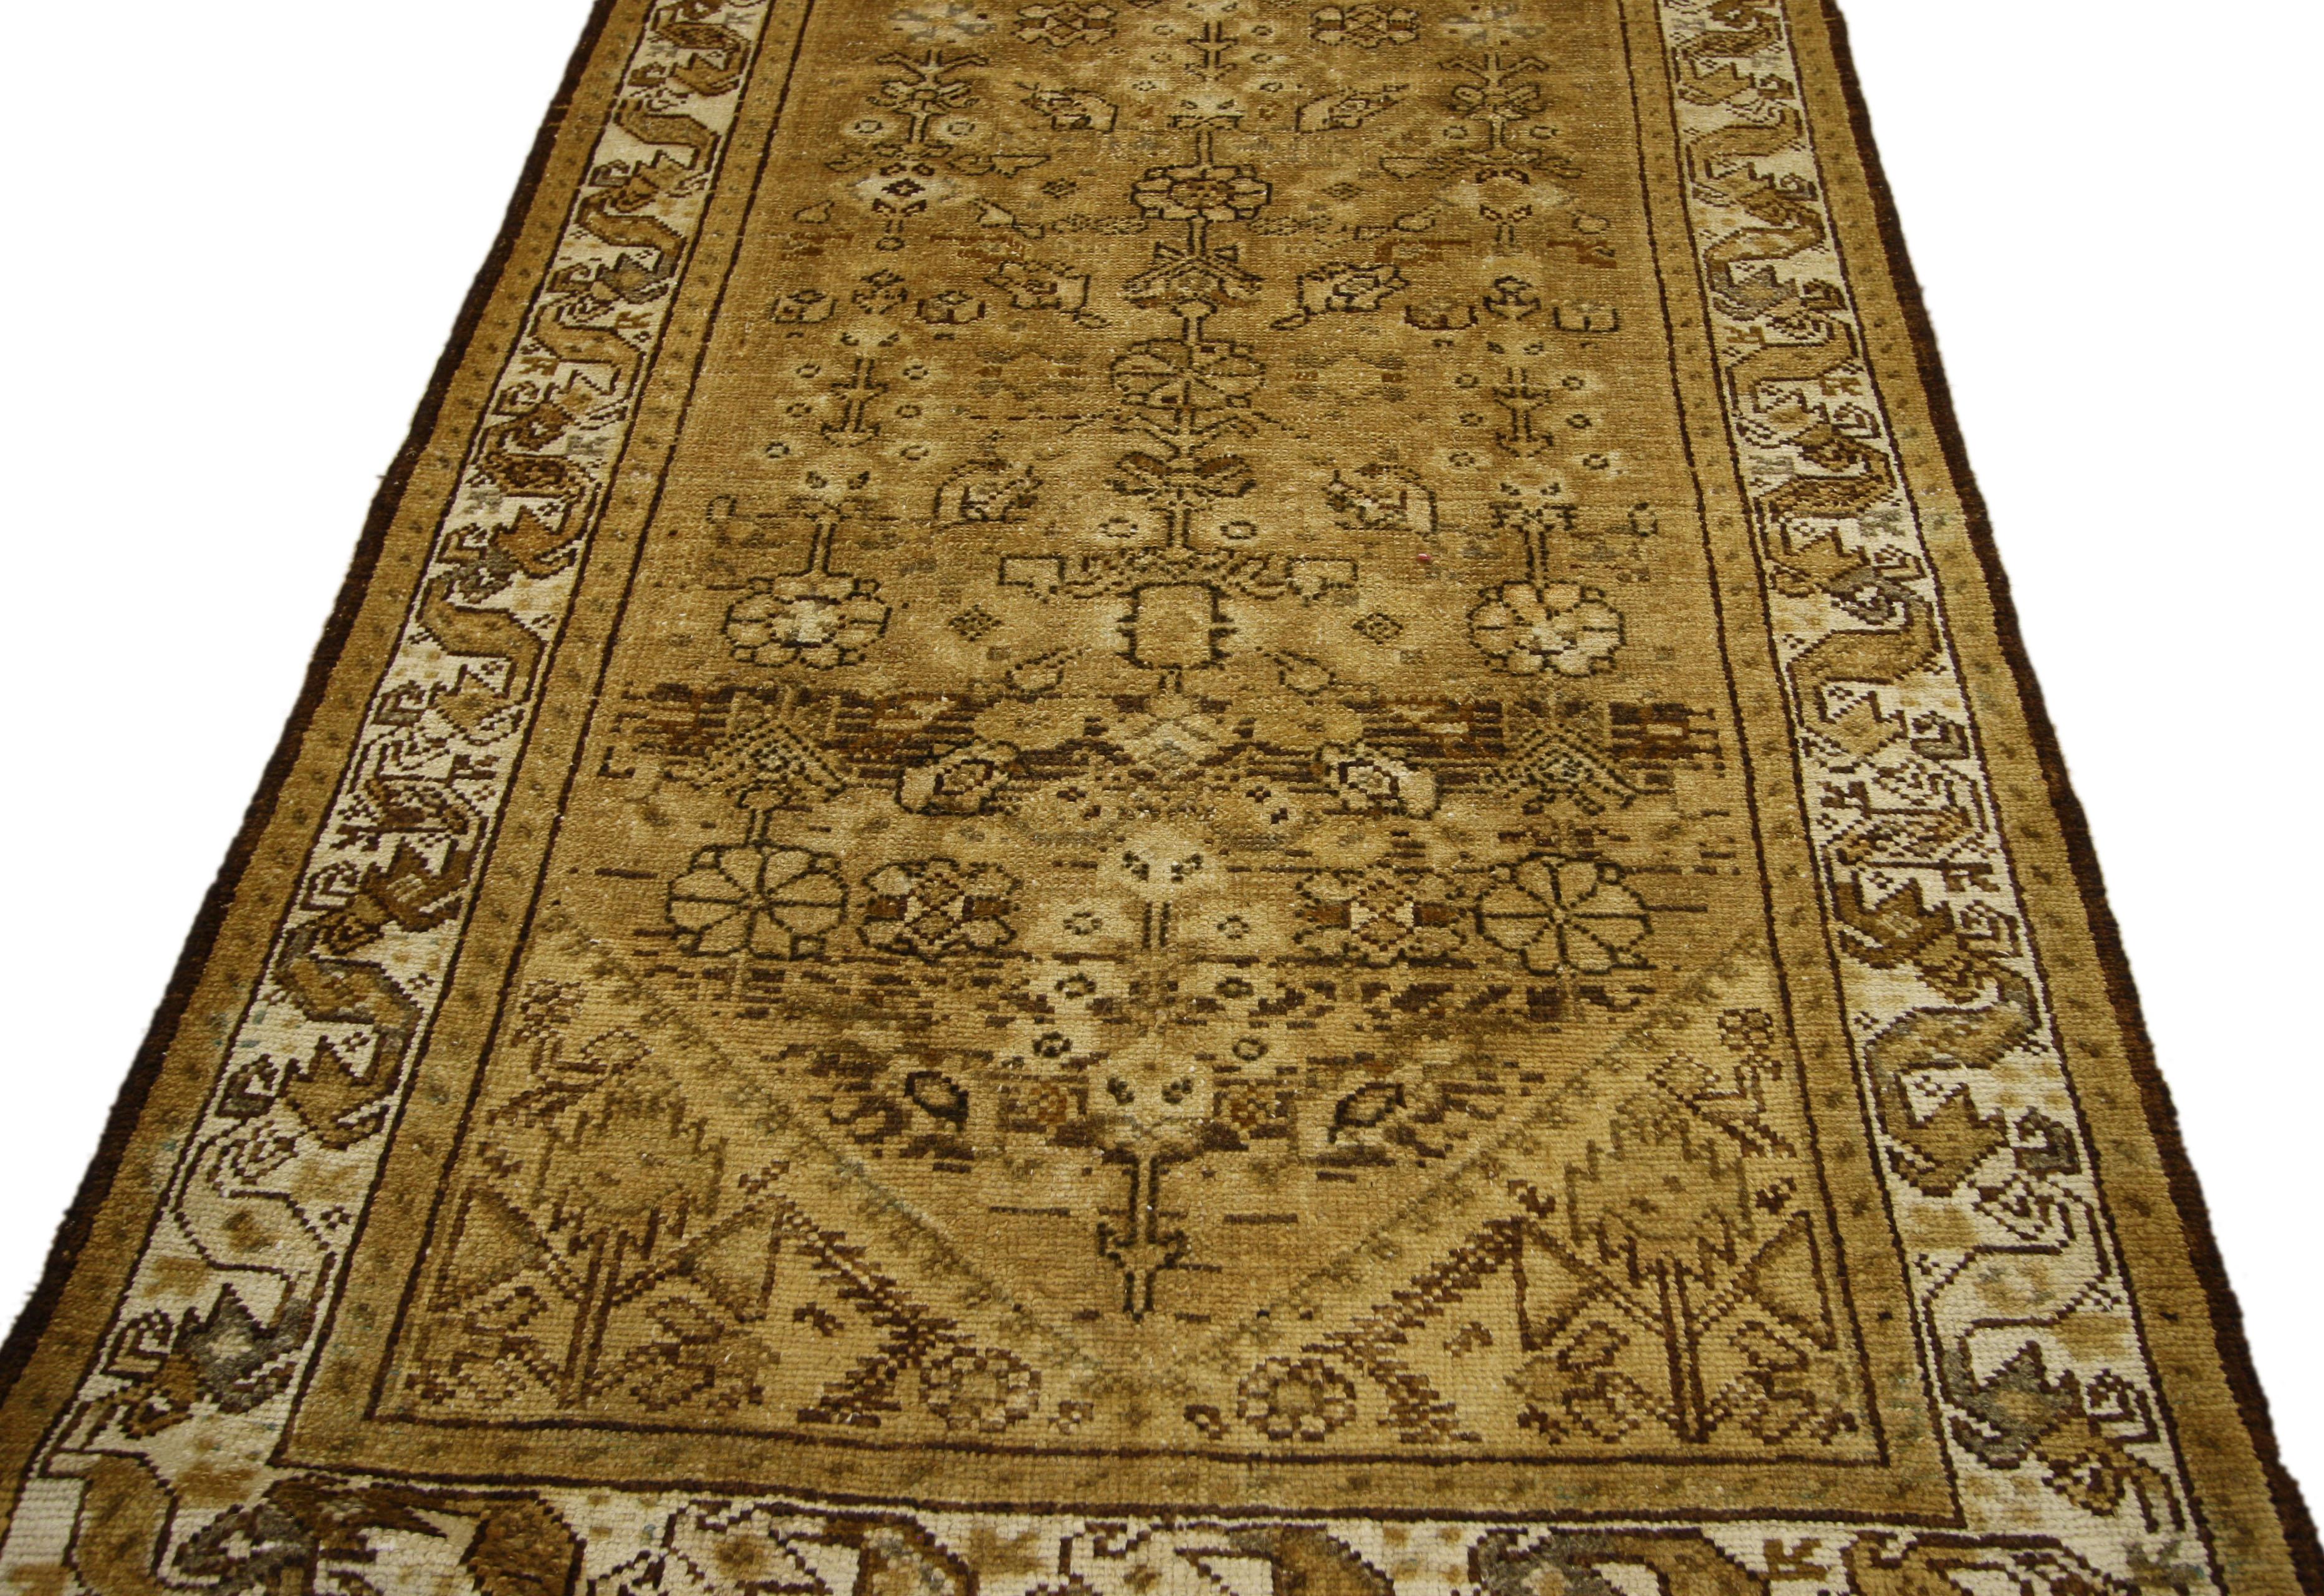 76550 Antique Persian Malayer Runner with Guli Hinnai Flower, Persian Hallway Runner 03'05 x 09'07. This antique Persian Malayer runner features a traditional modern style in neutral colors. The all-over geometric flower pattern is composed of the